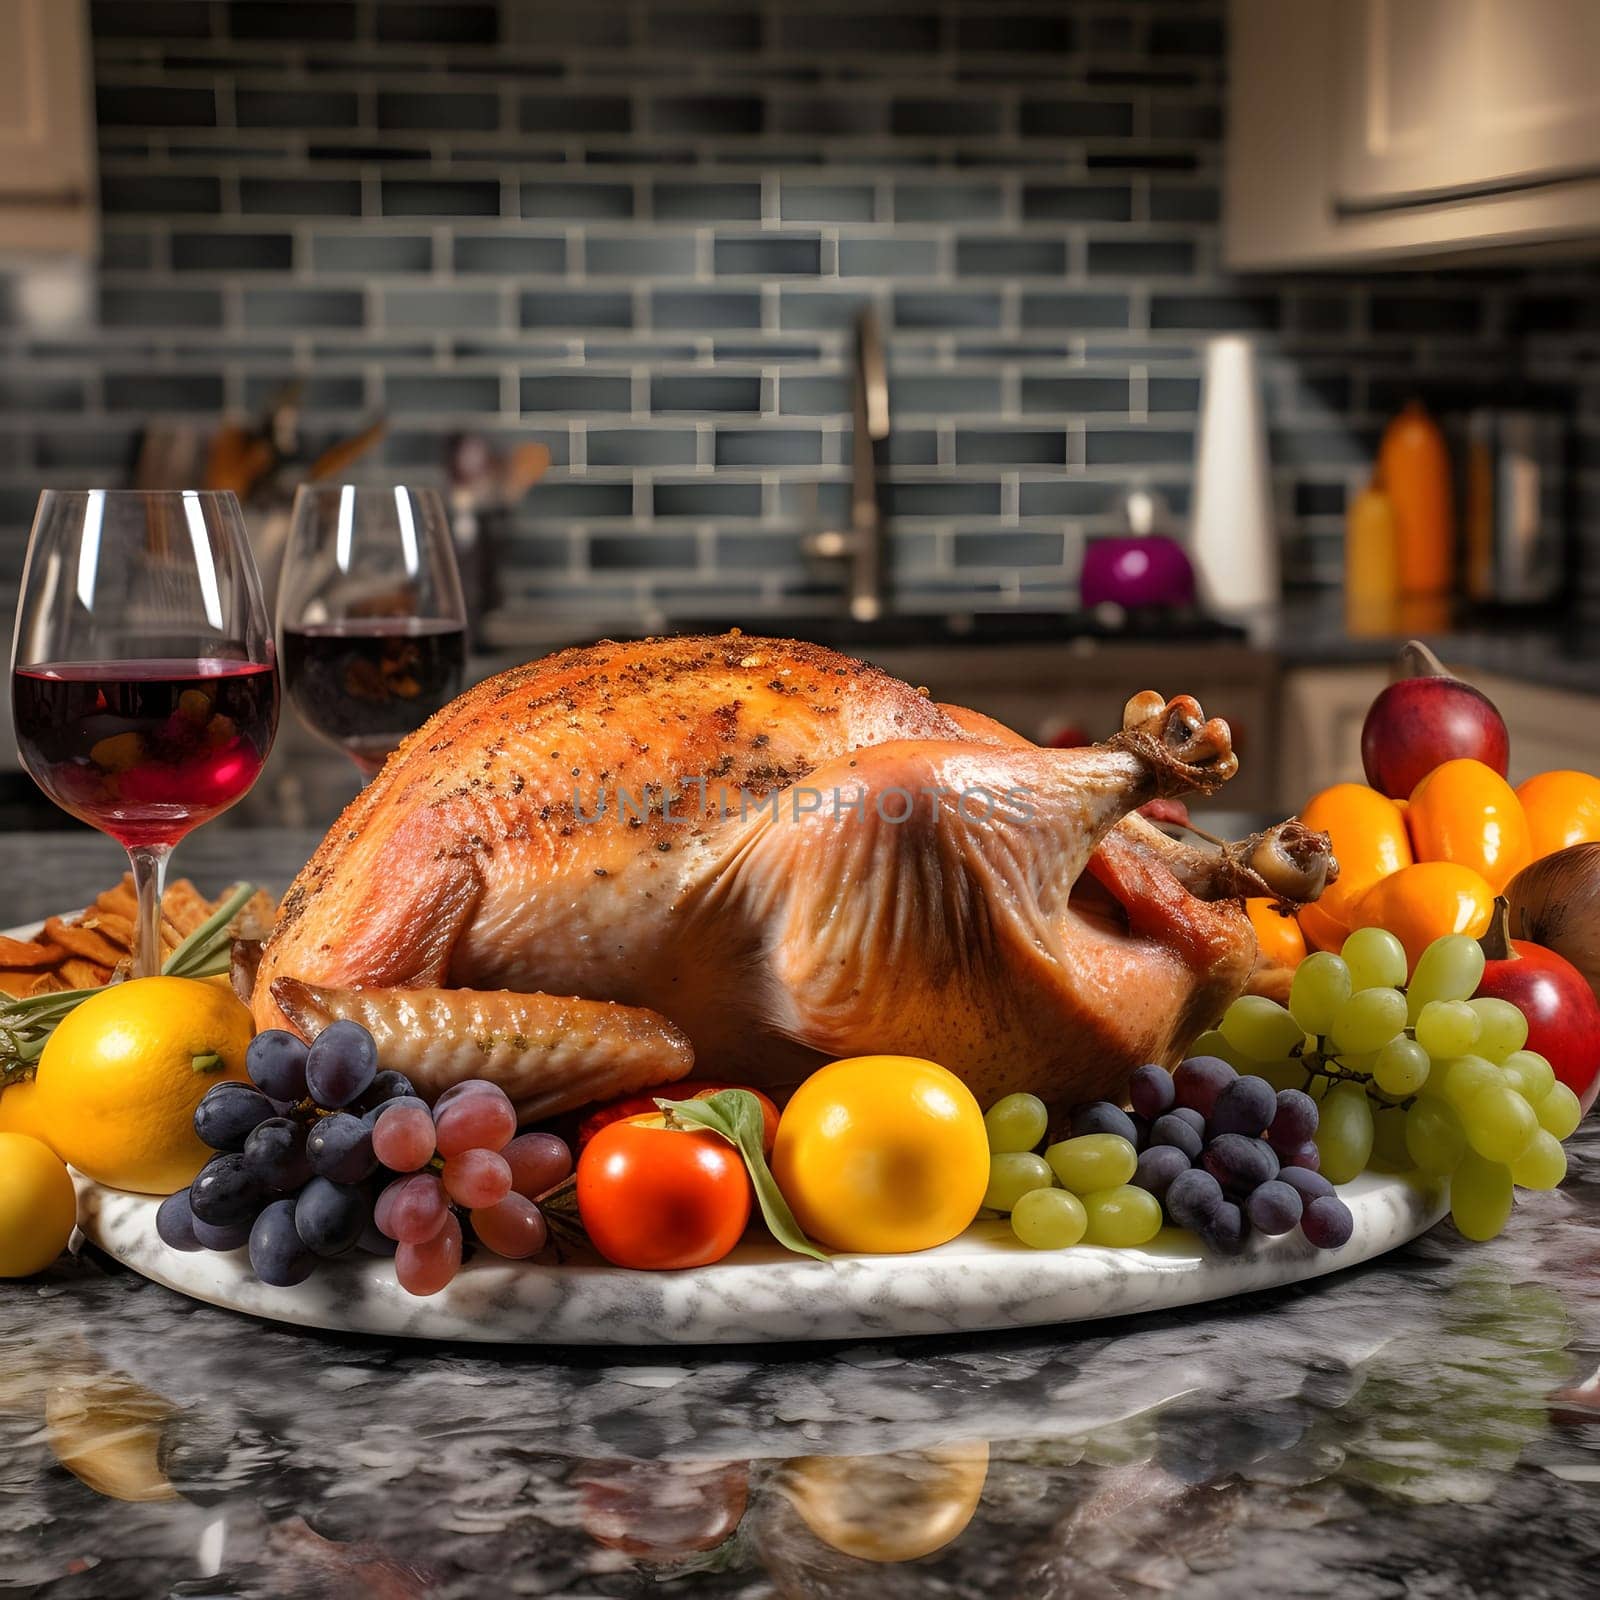 Kitchen tray with roasted turkey, pumpkins and oranges around wine in the background kitchen. Turkey as the main dish of thanksgiving for the harvest. by ThemesS